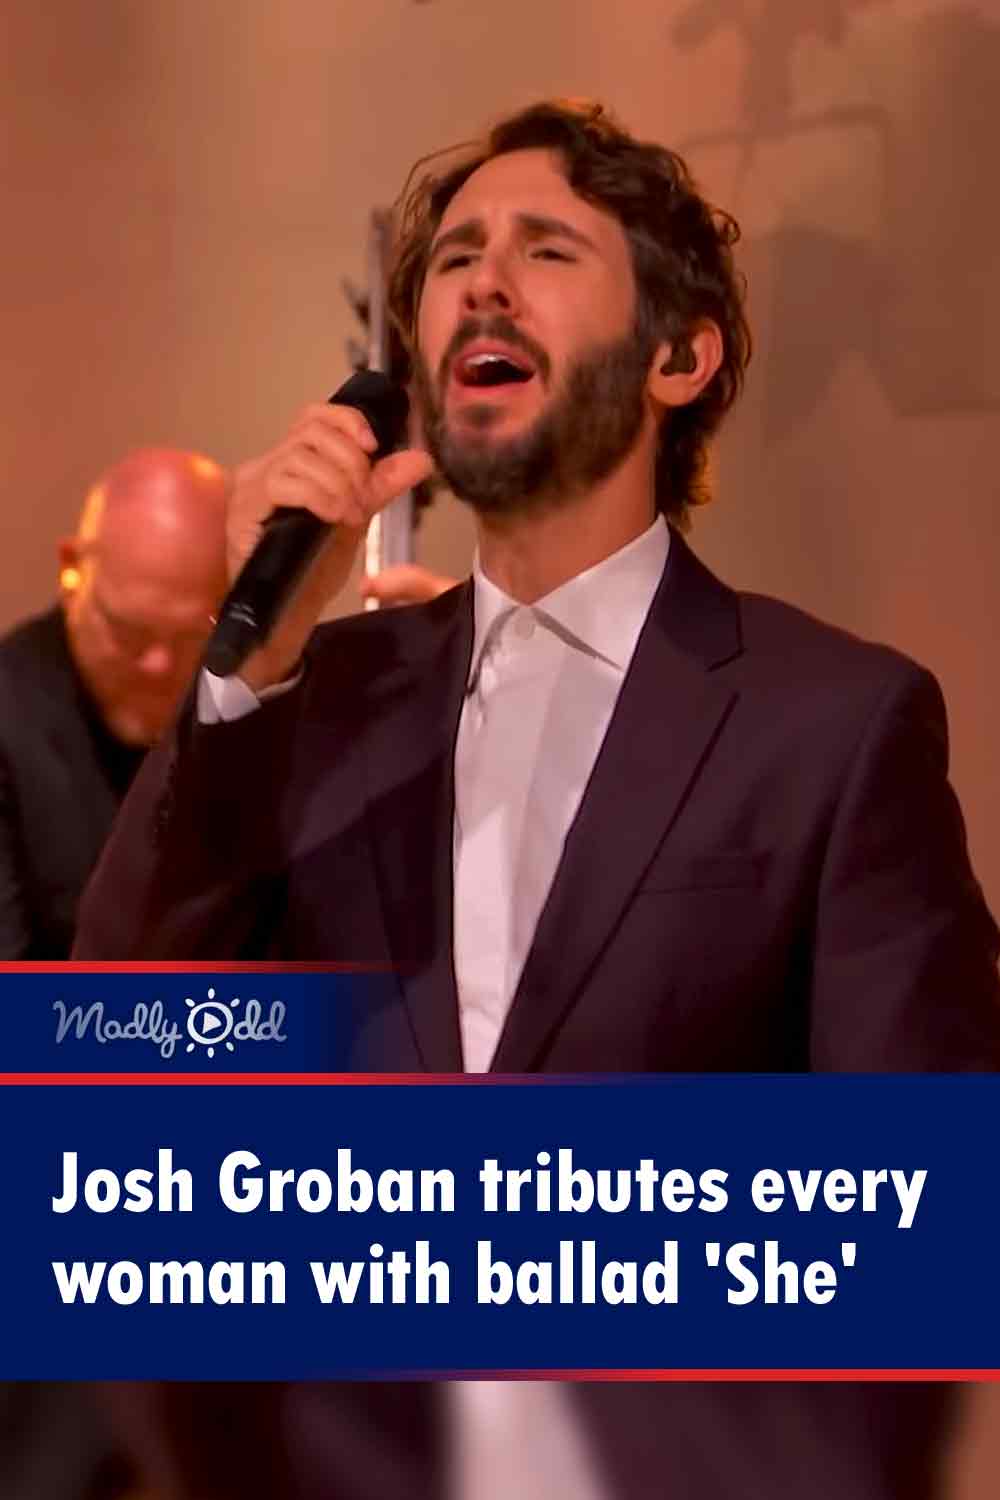 Josh Groban tributes every woman with ballad \'She\'